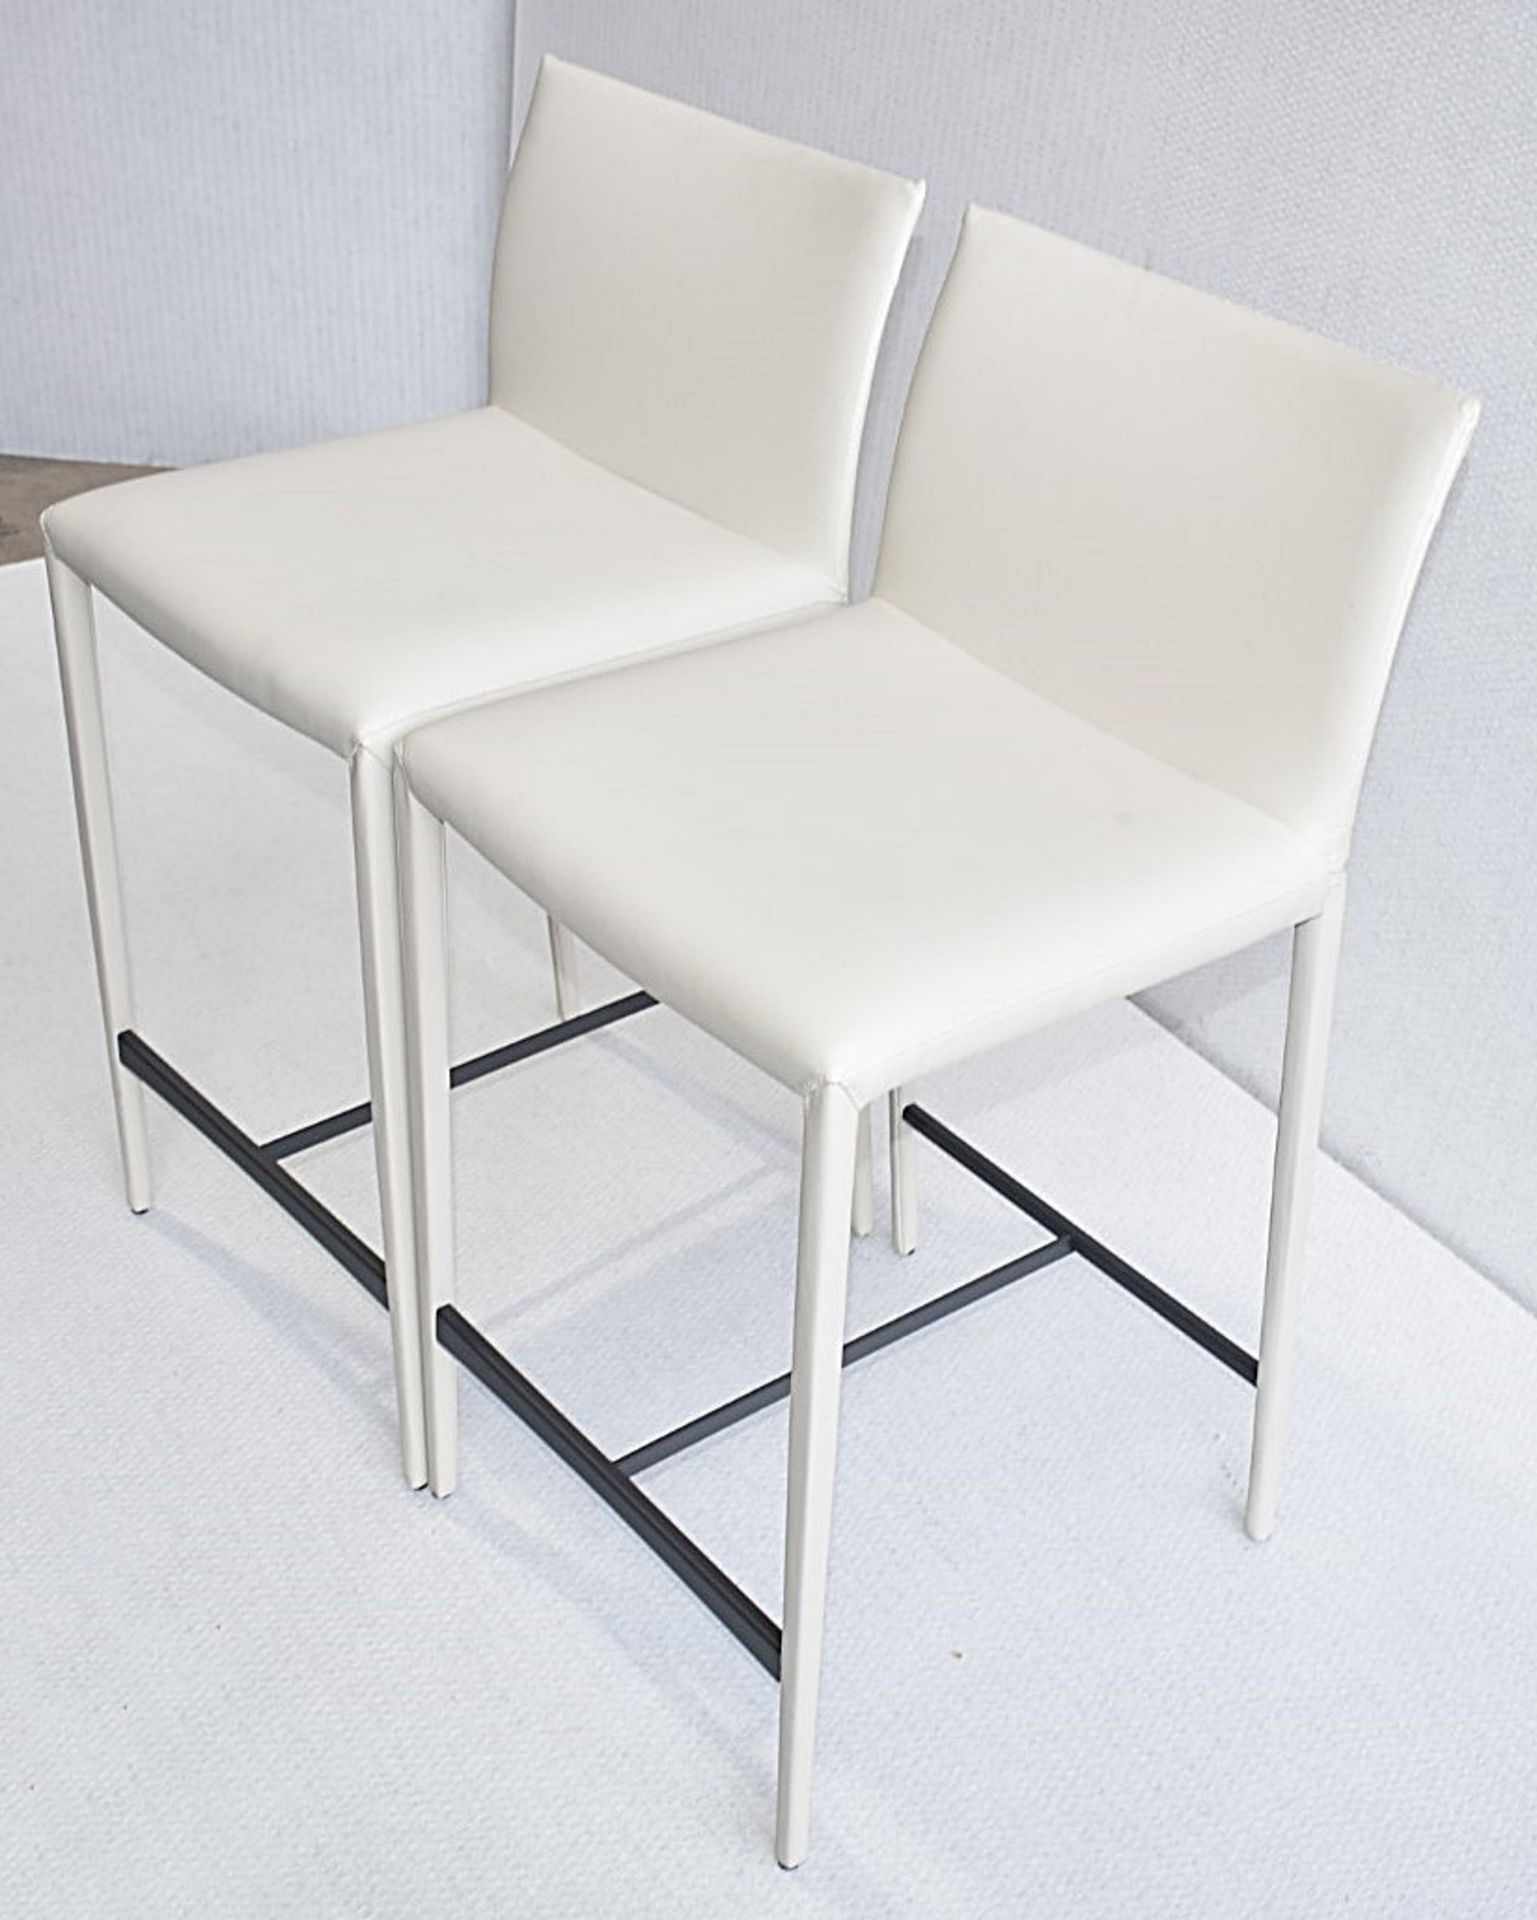 Pair of CATTELAN ITALIA 'Norma' Designer Fully Upholstered Stools in a Light Synthetic Leather - Image 3 of 9